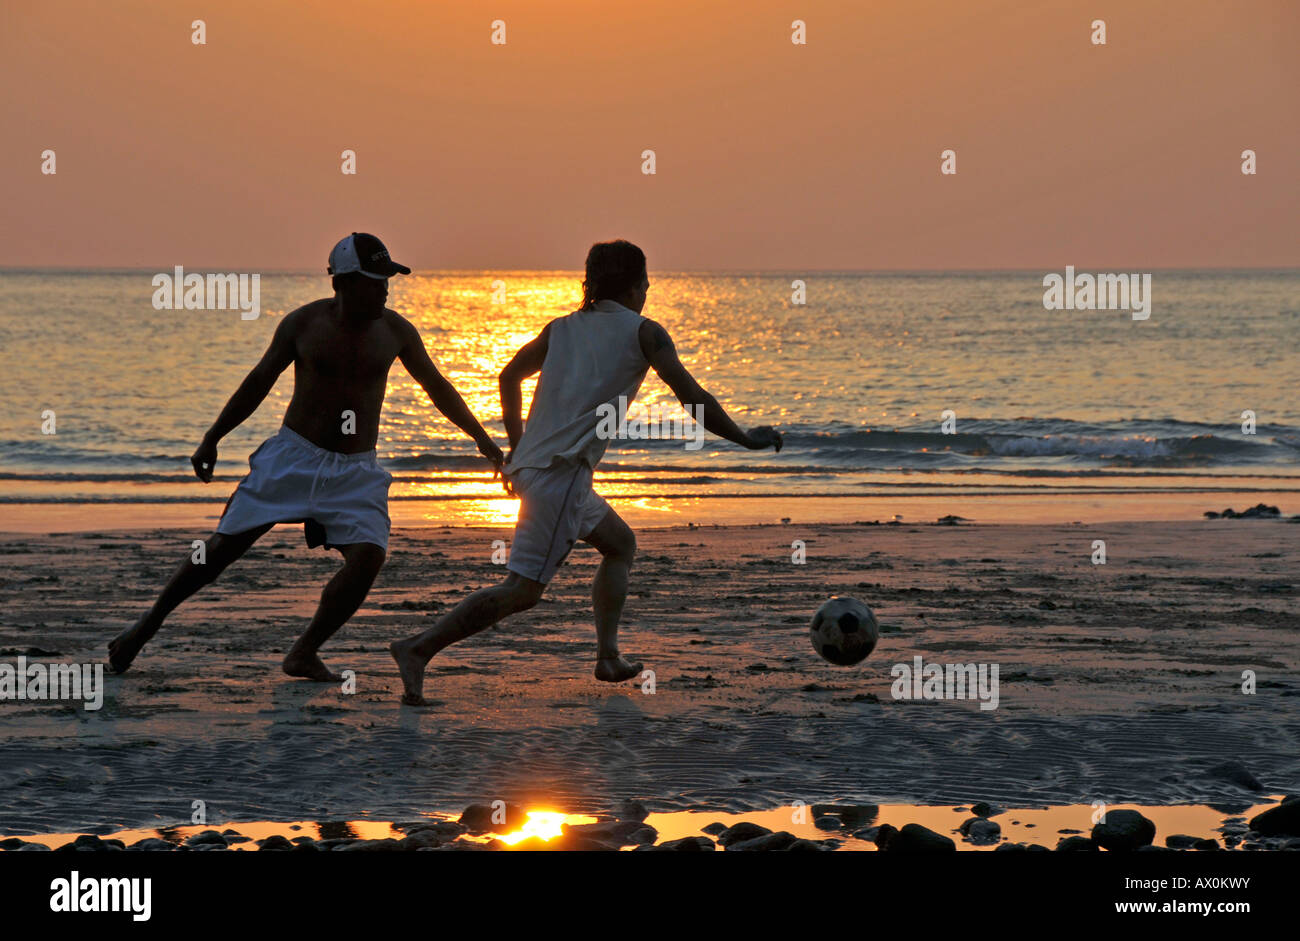 Playing football (soccer) on the beach, Koh Chang, Thailand, Southeast Asia, Asia Stock Photo